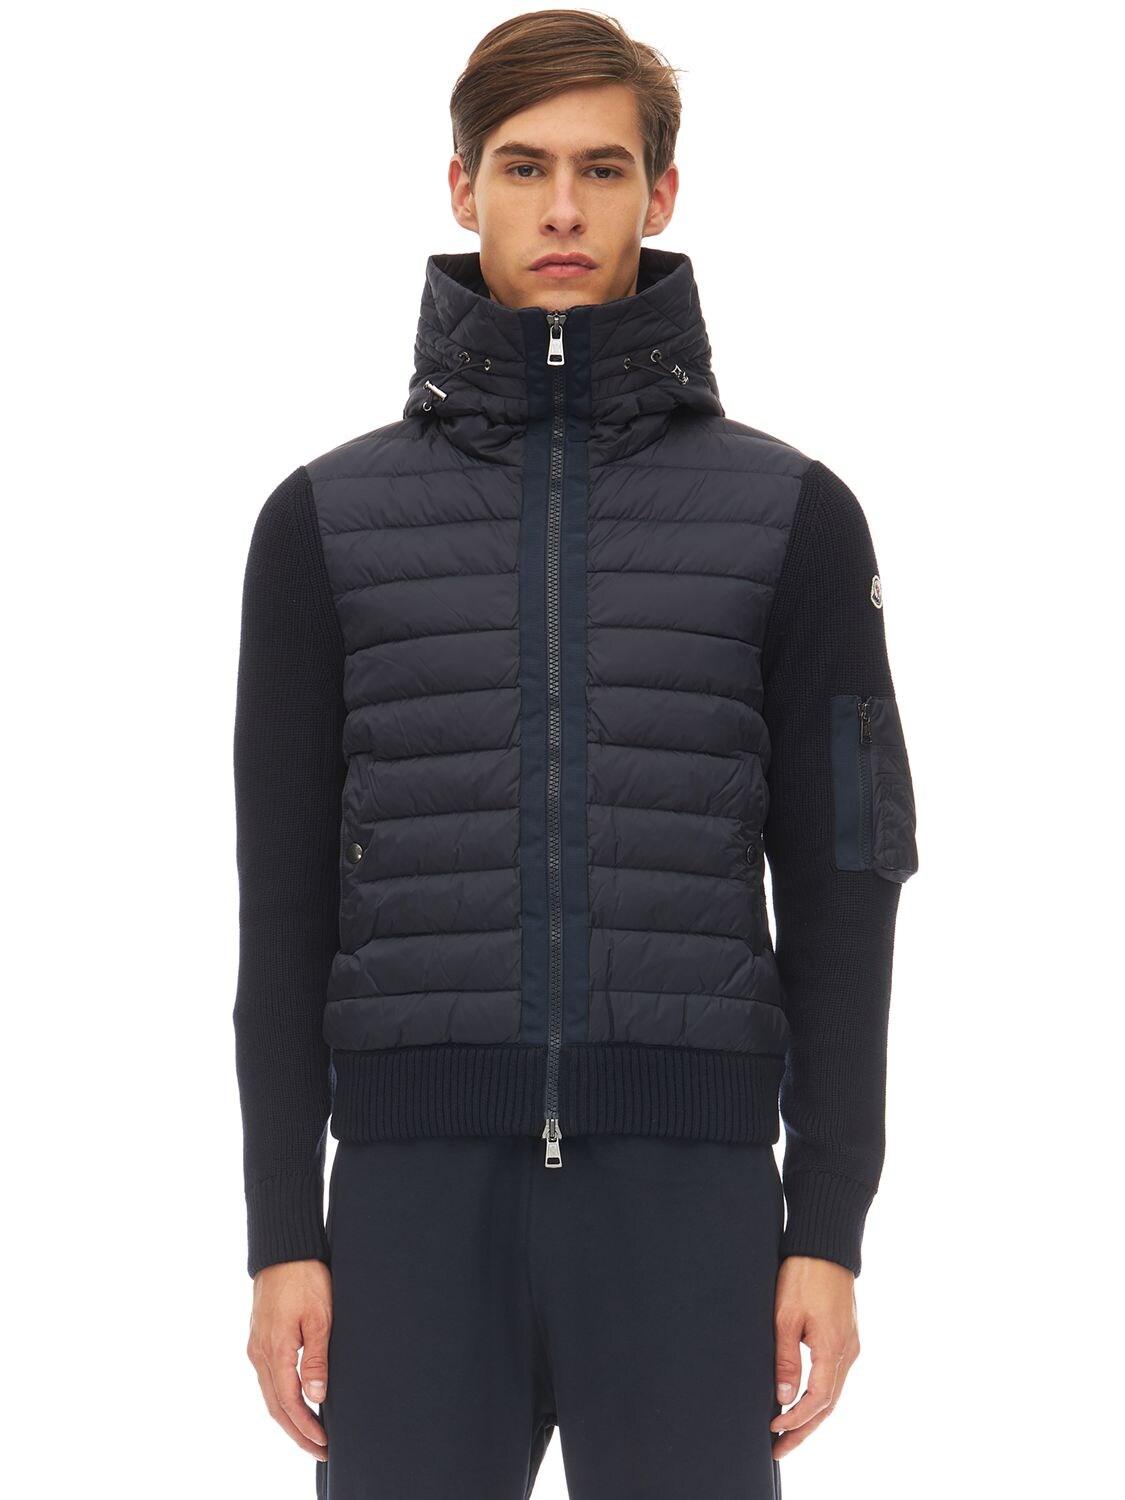 Moncler Wool Blend Tricot Down Jacket in Navy (Blue) for Men - Lyst